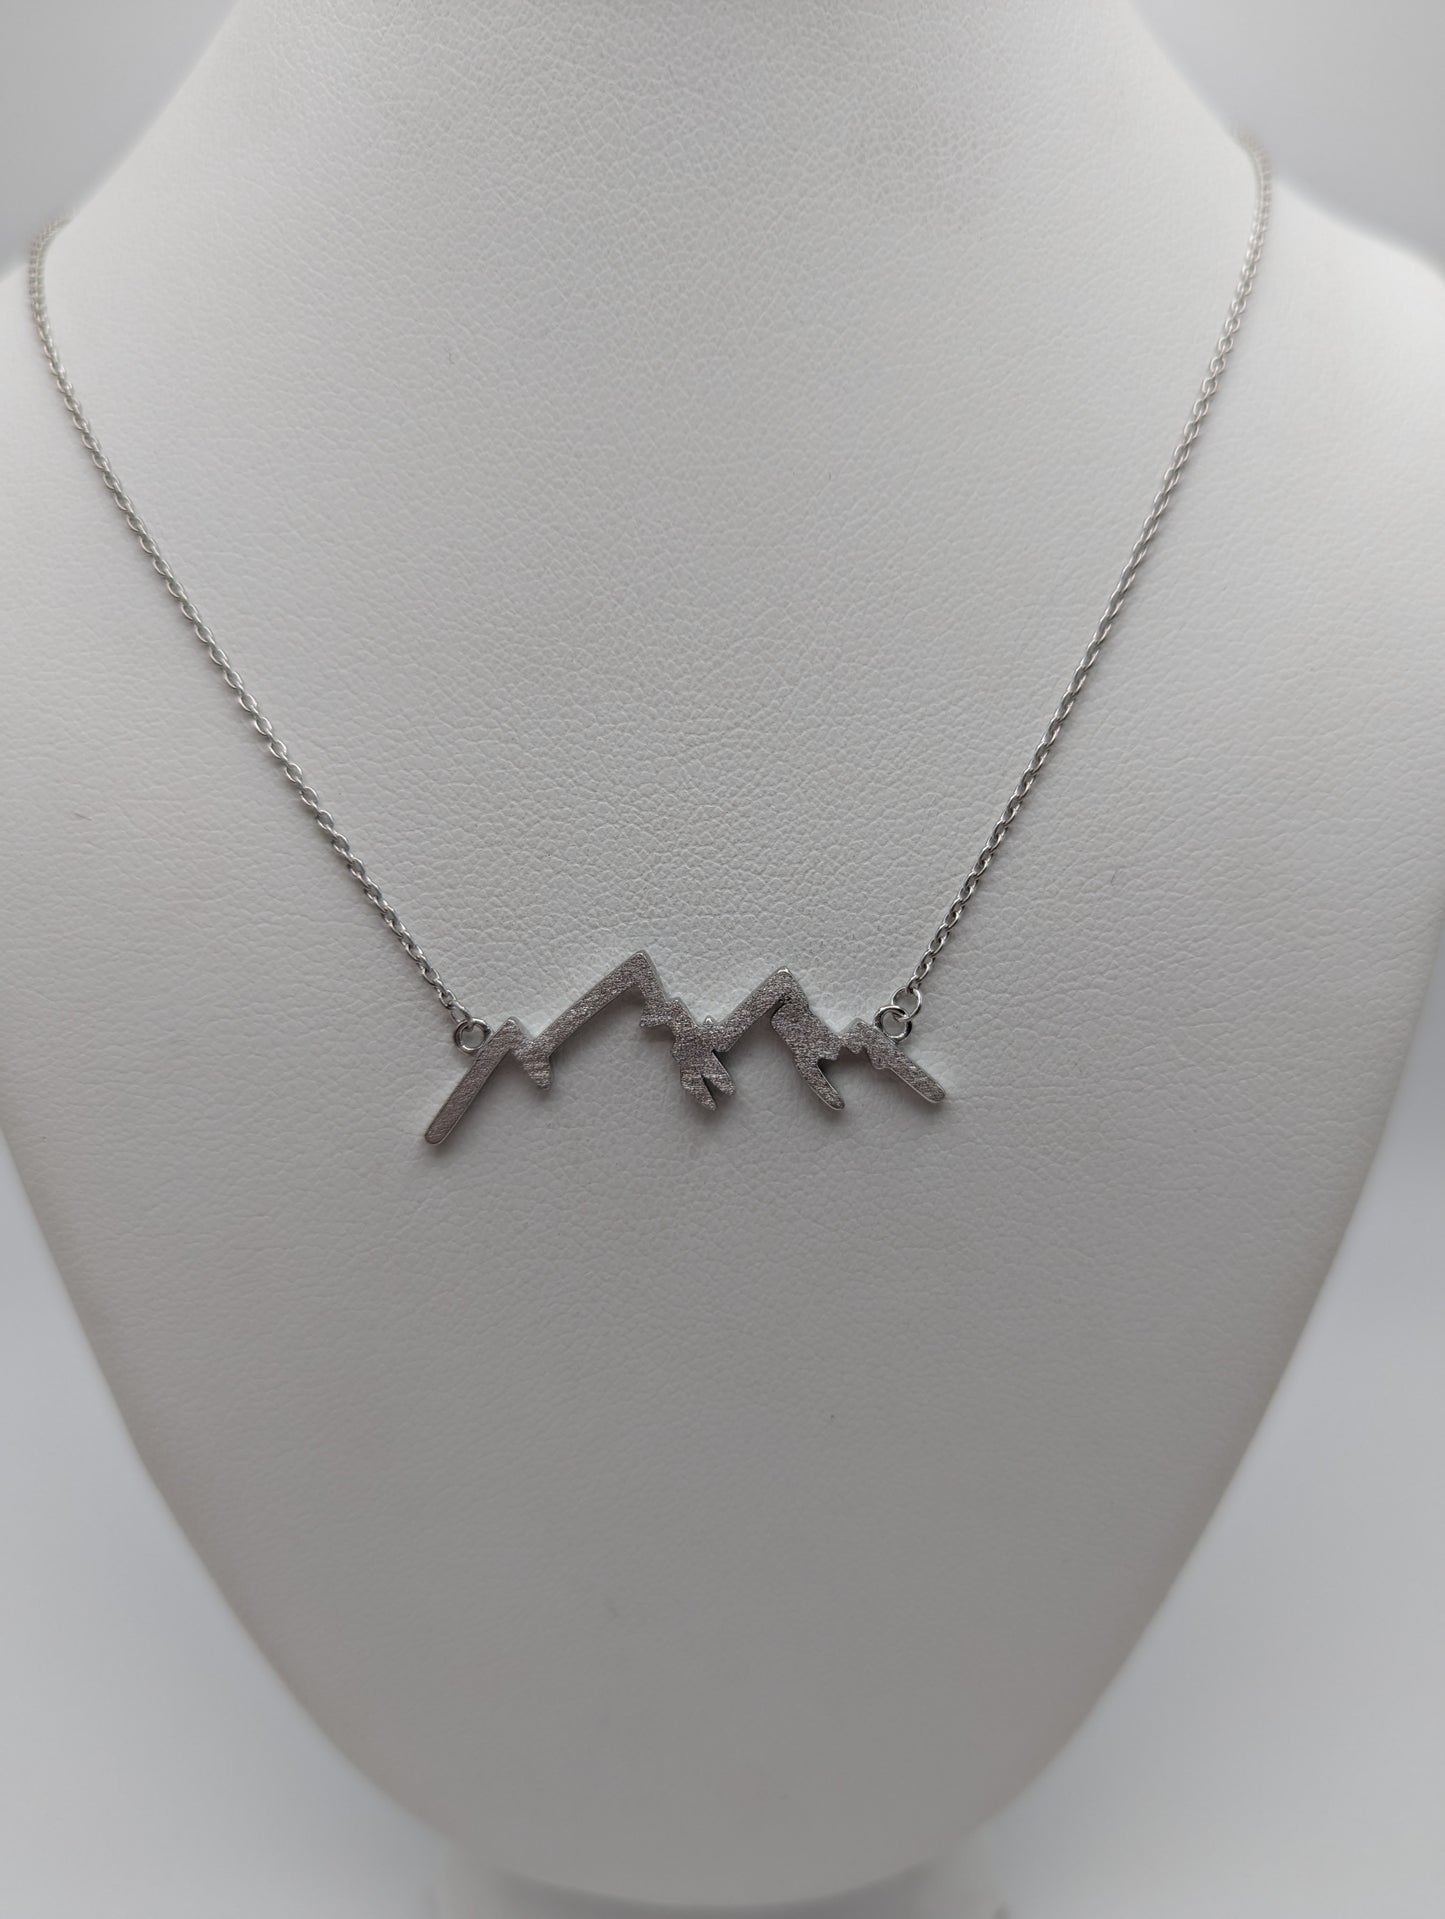 Reversible Mountain Silhouette Necklace